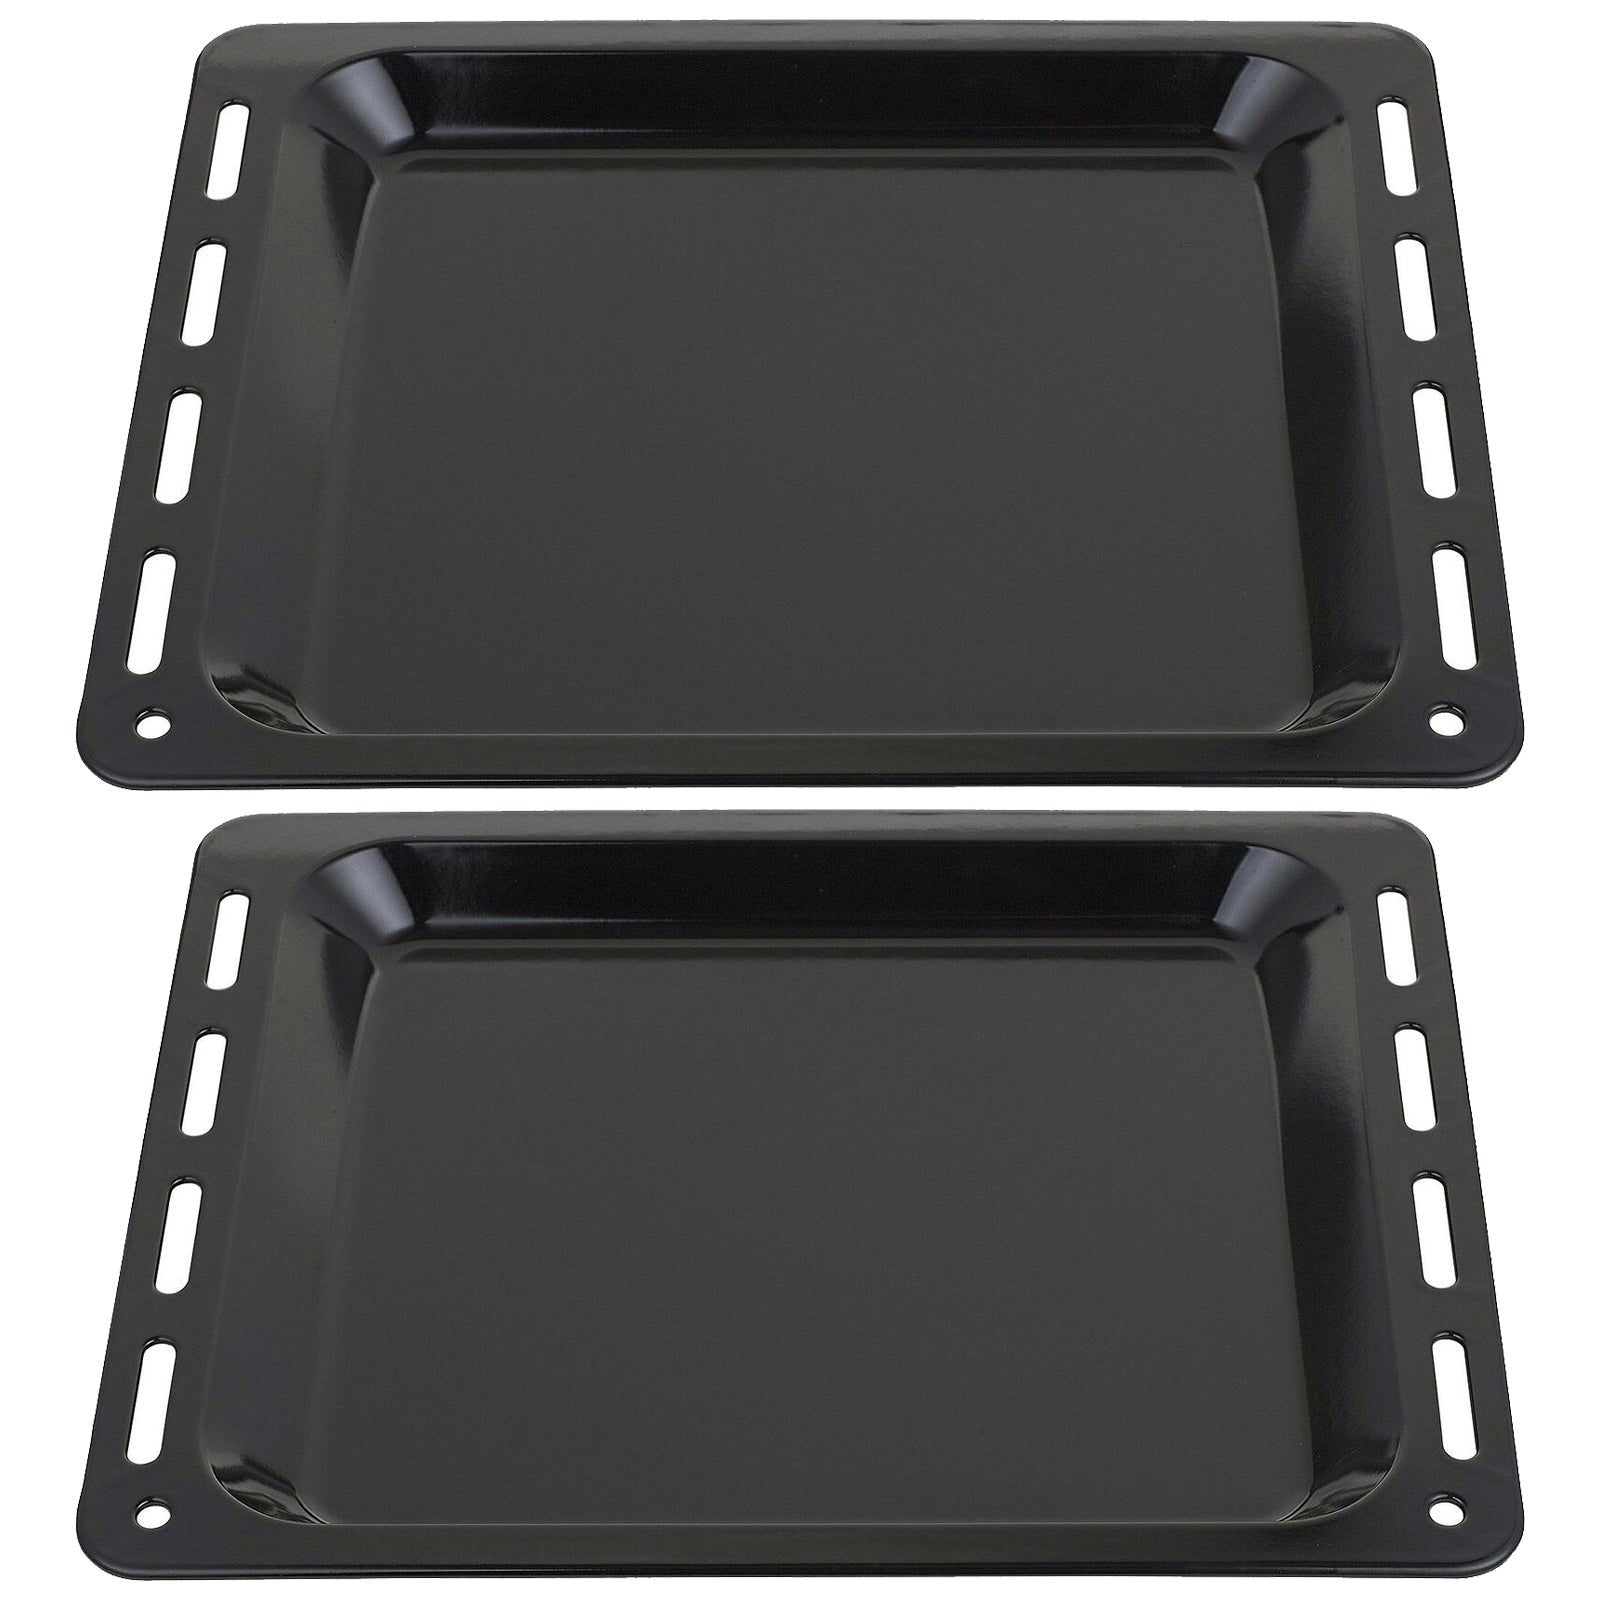 Baking Tray Enamelled Pan for Bosch Oven Cooker (448mm x 360mm x 25mm, Pack of 2)